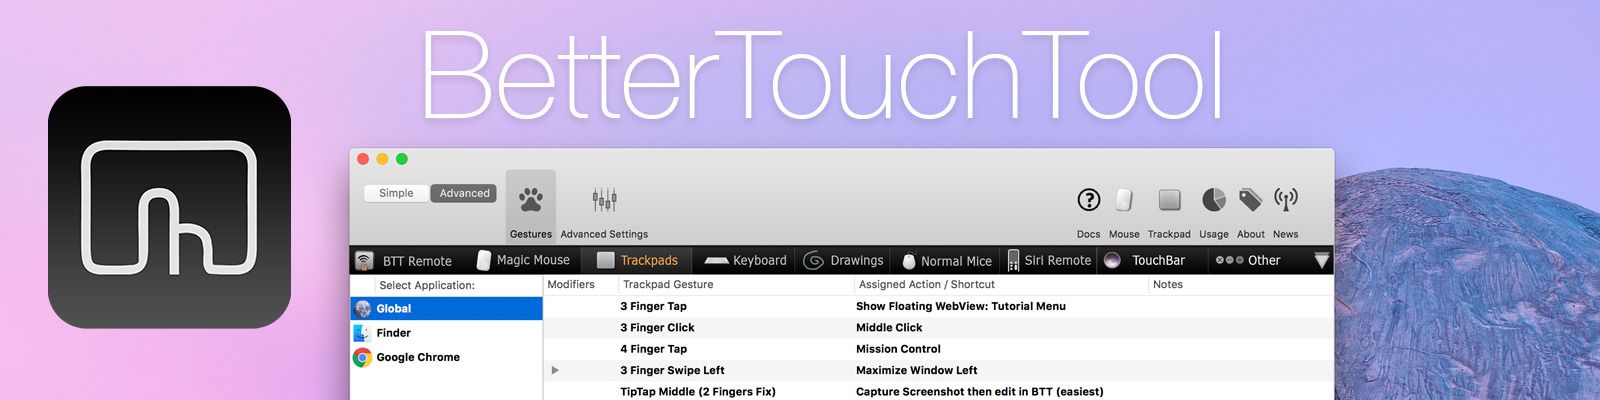 BetterTouchTool free download